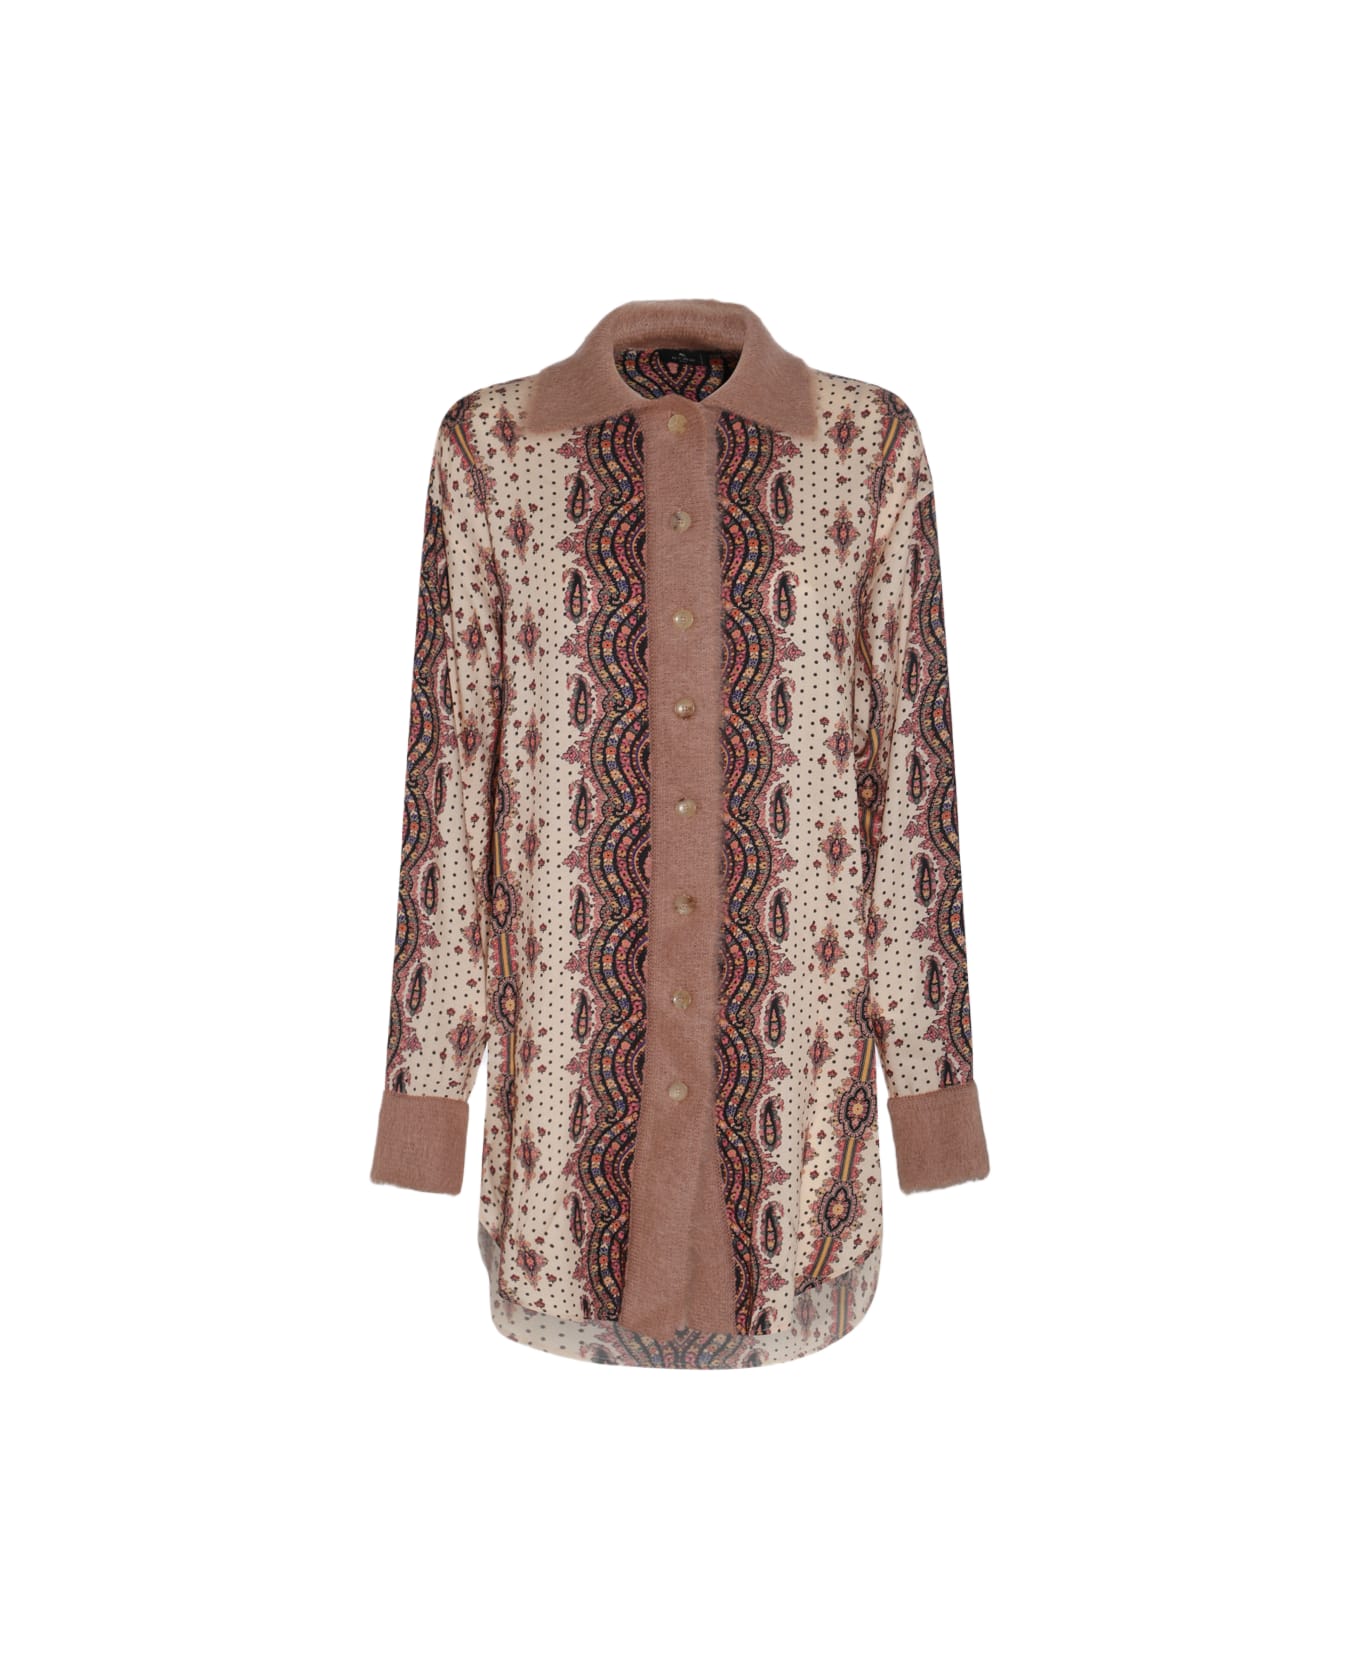 Etro Multicolor Wool And Silk Shirt - White